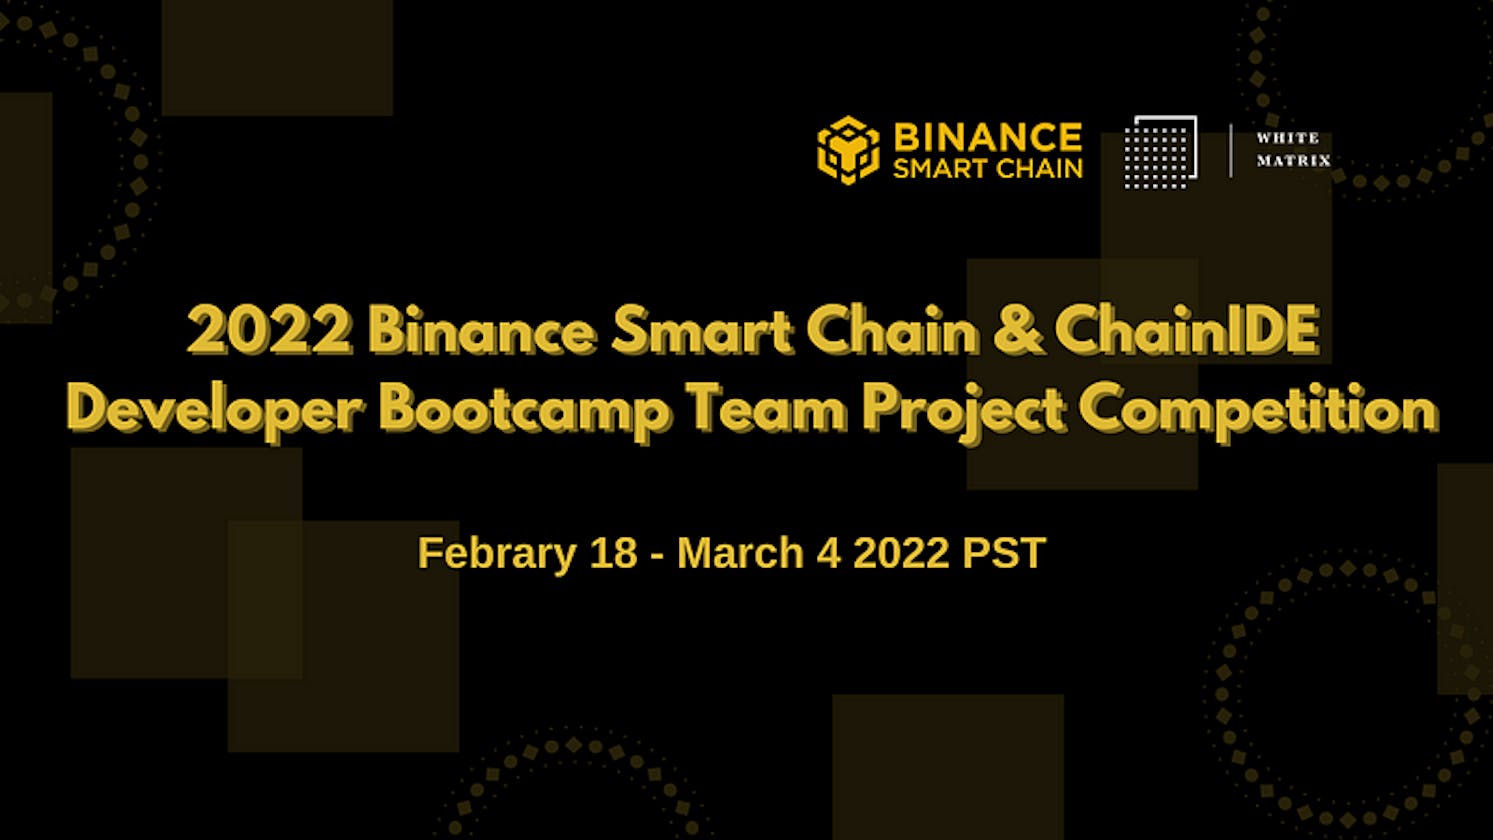 2022 Binance Smart Chain & ChainIDE Developer Bootcamp Team Project Competition